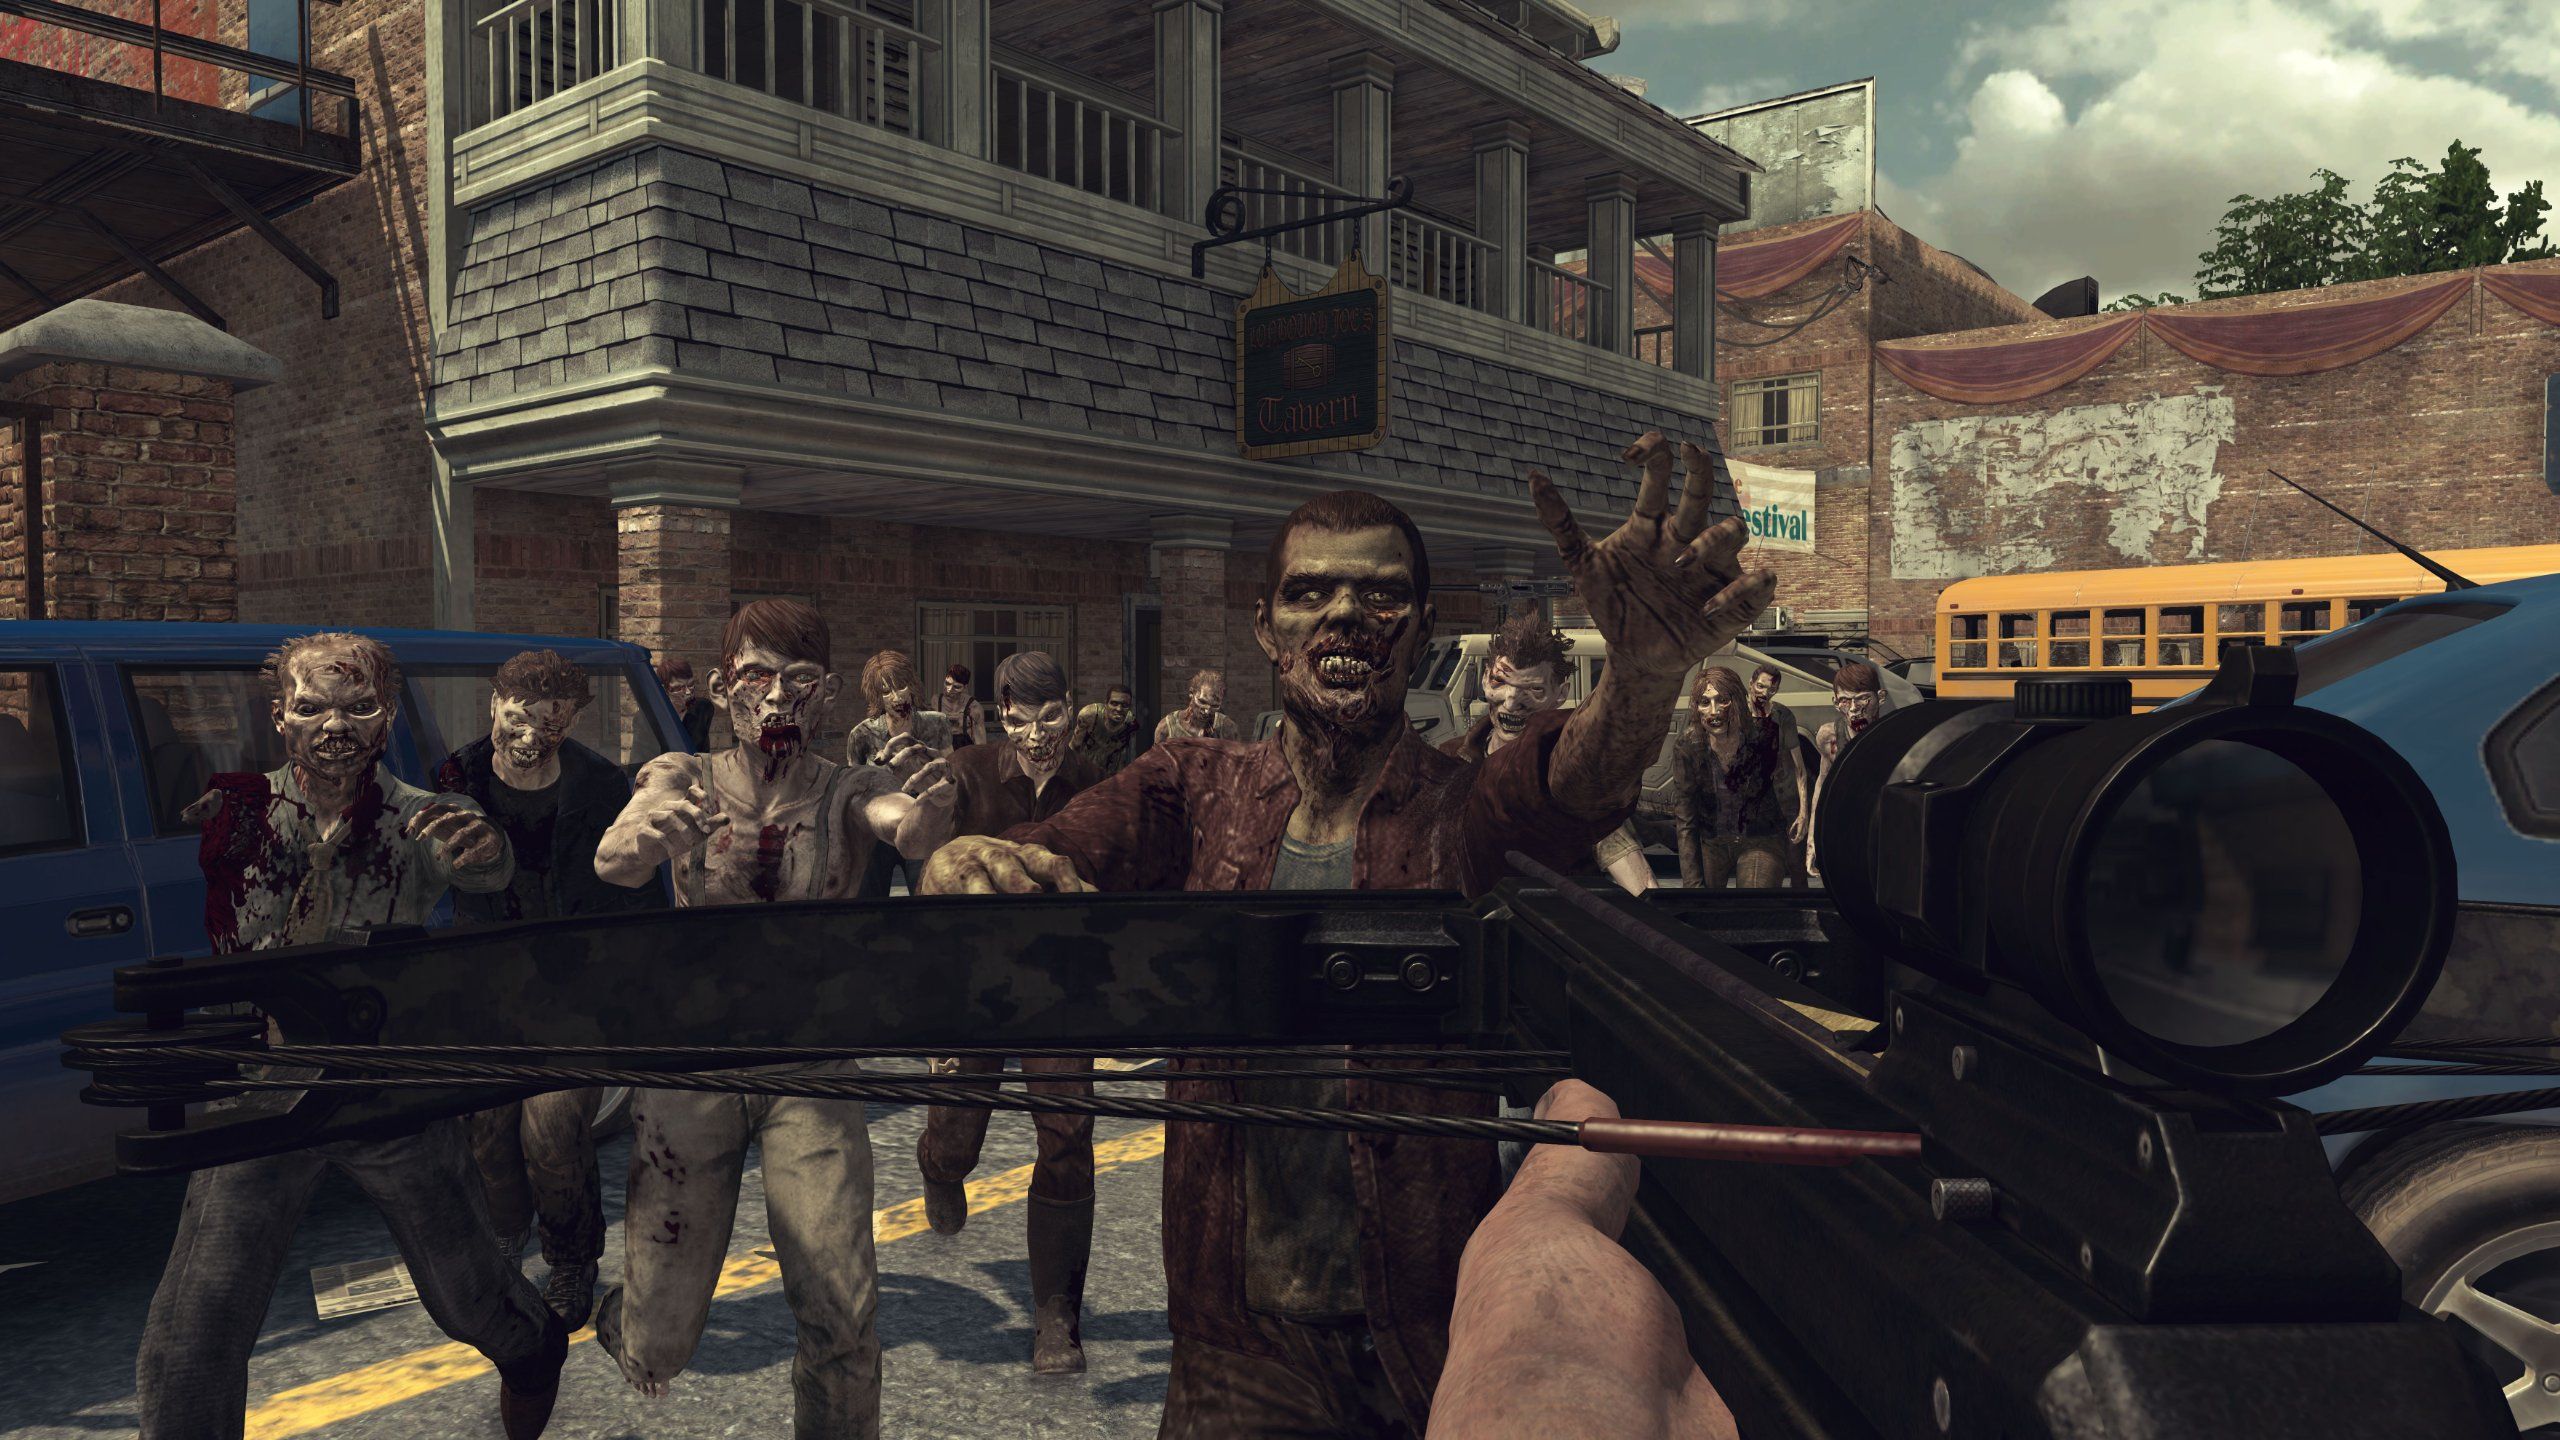 The player looks down a crossbow in first-person view as walkers attack in the game The Walking Dead: Survival Instinct